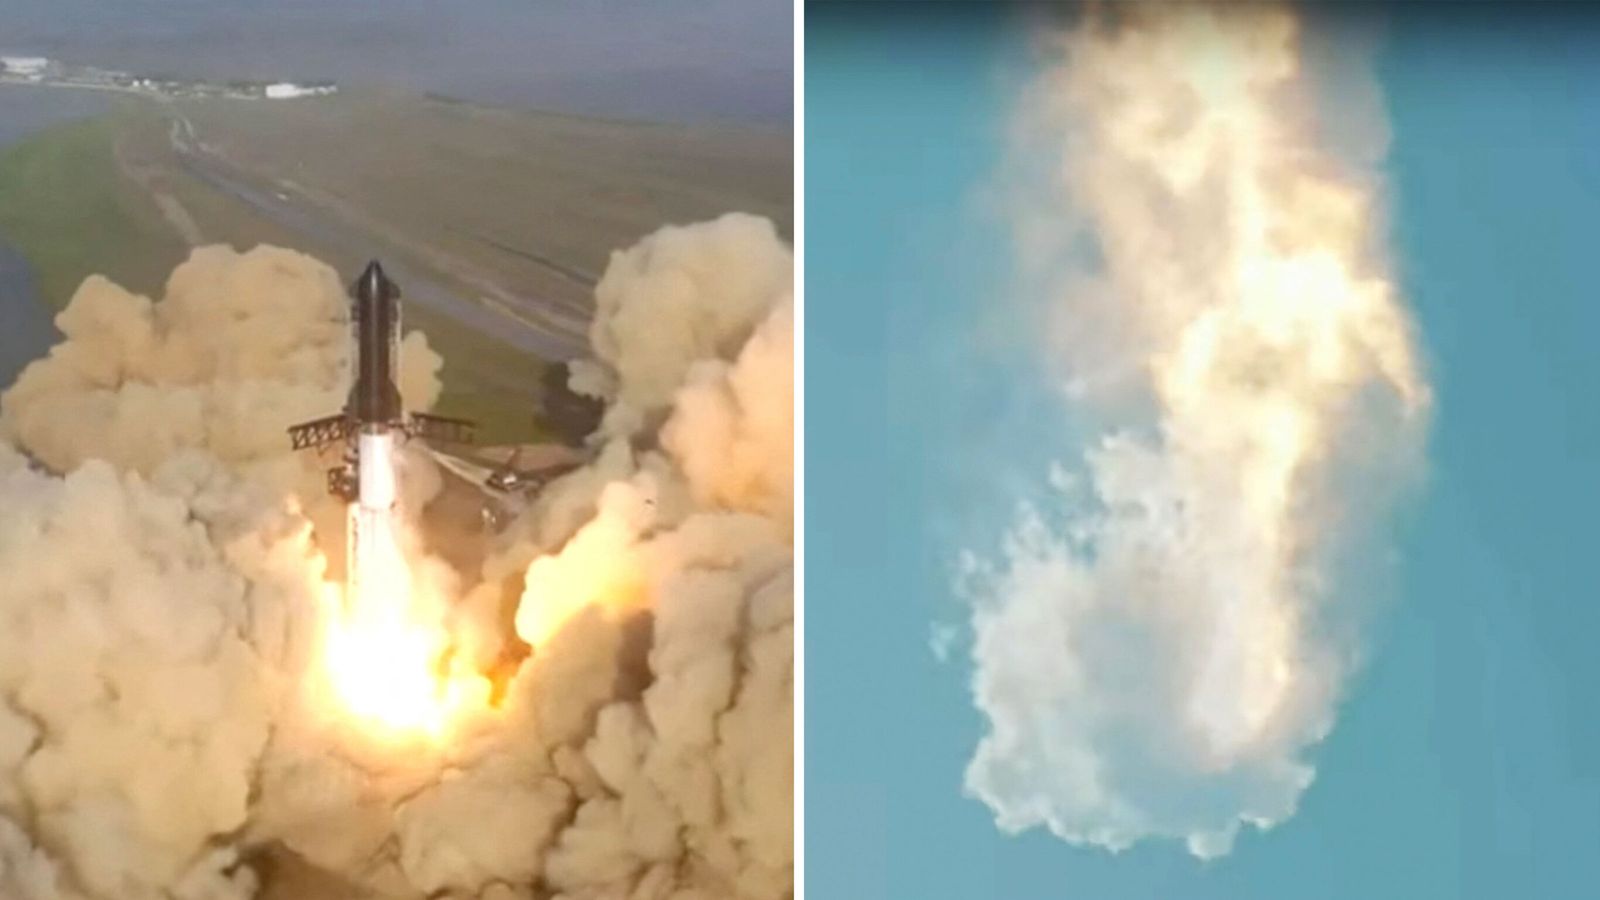 SpaceX's Starship explodes minutes after landmark launch of world's most powerful rocket system